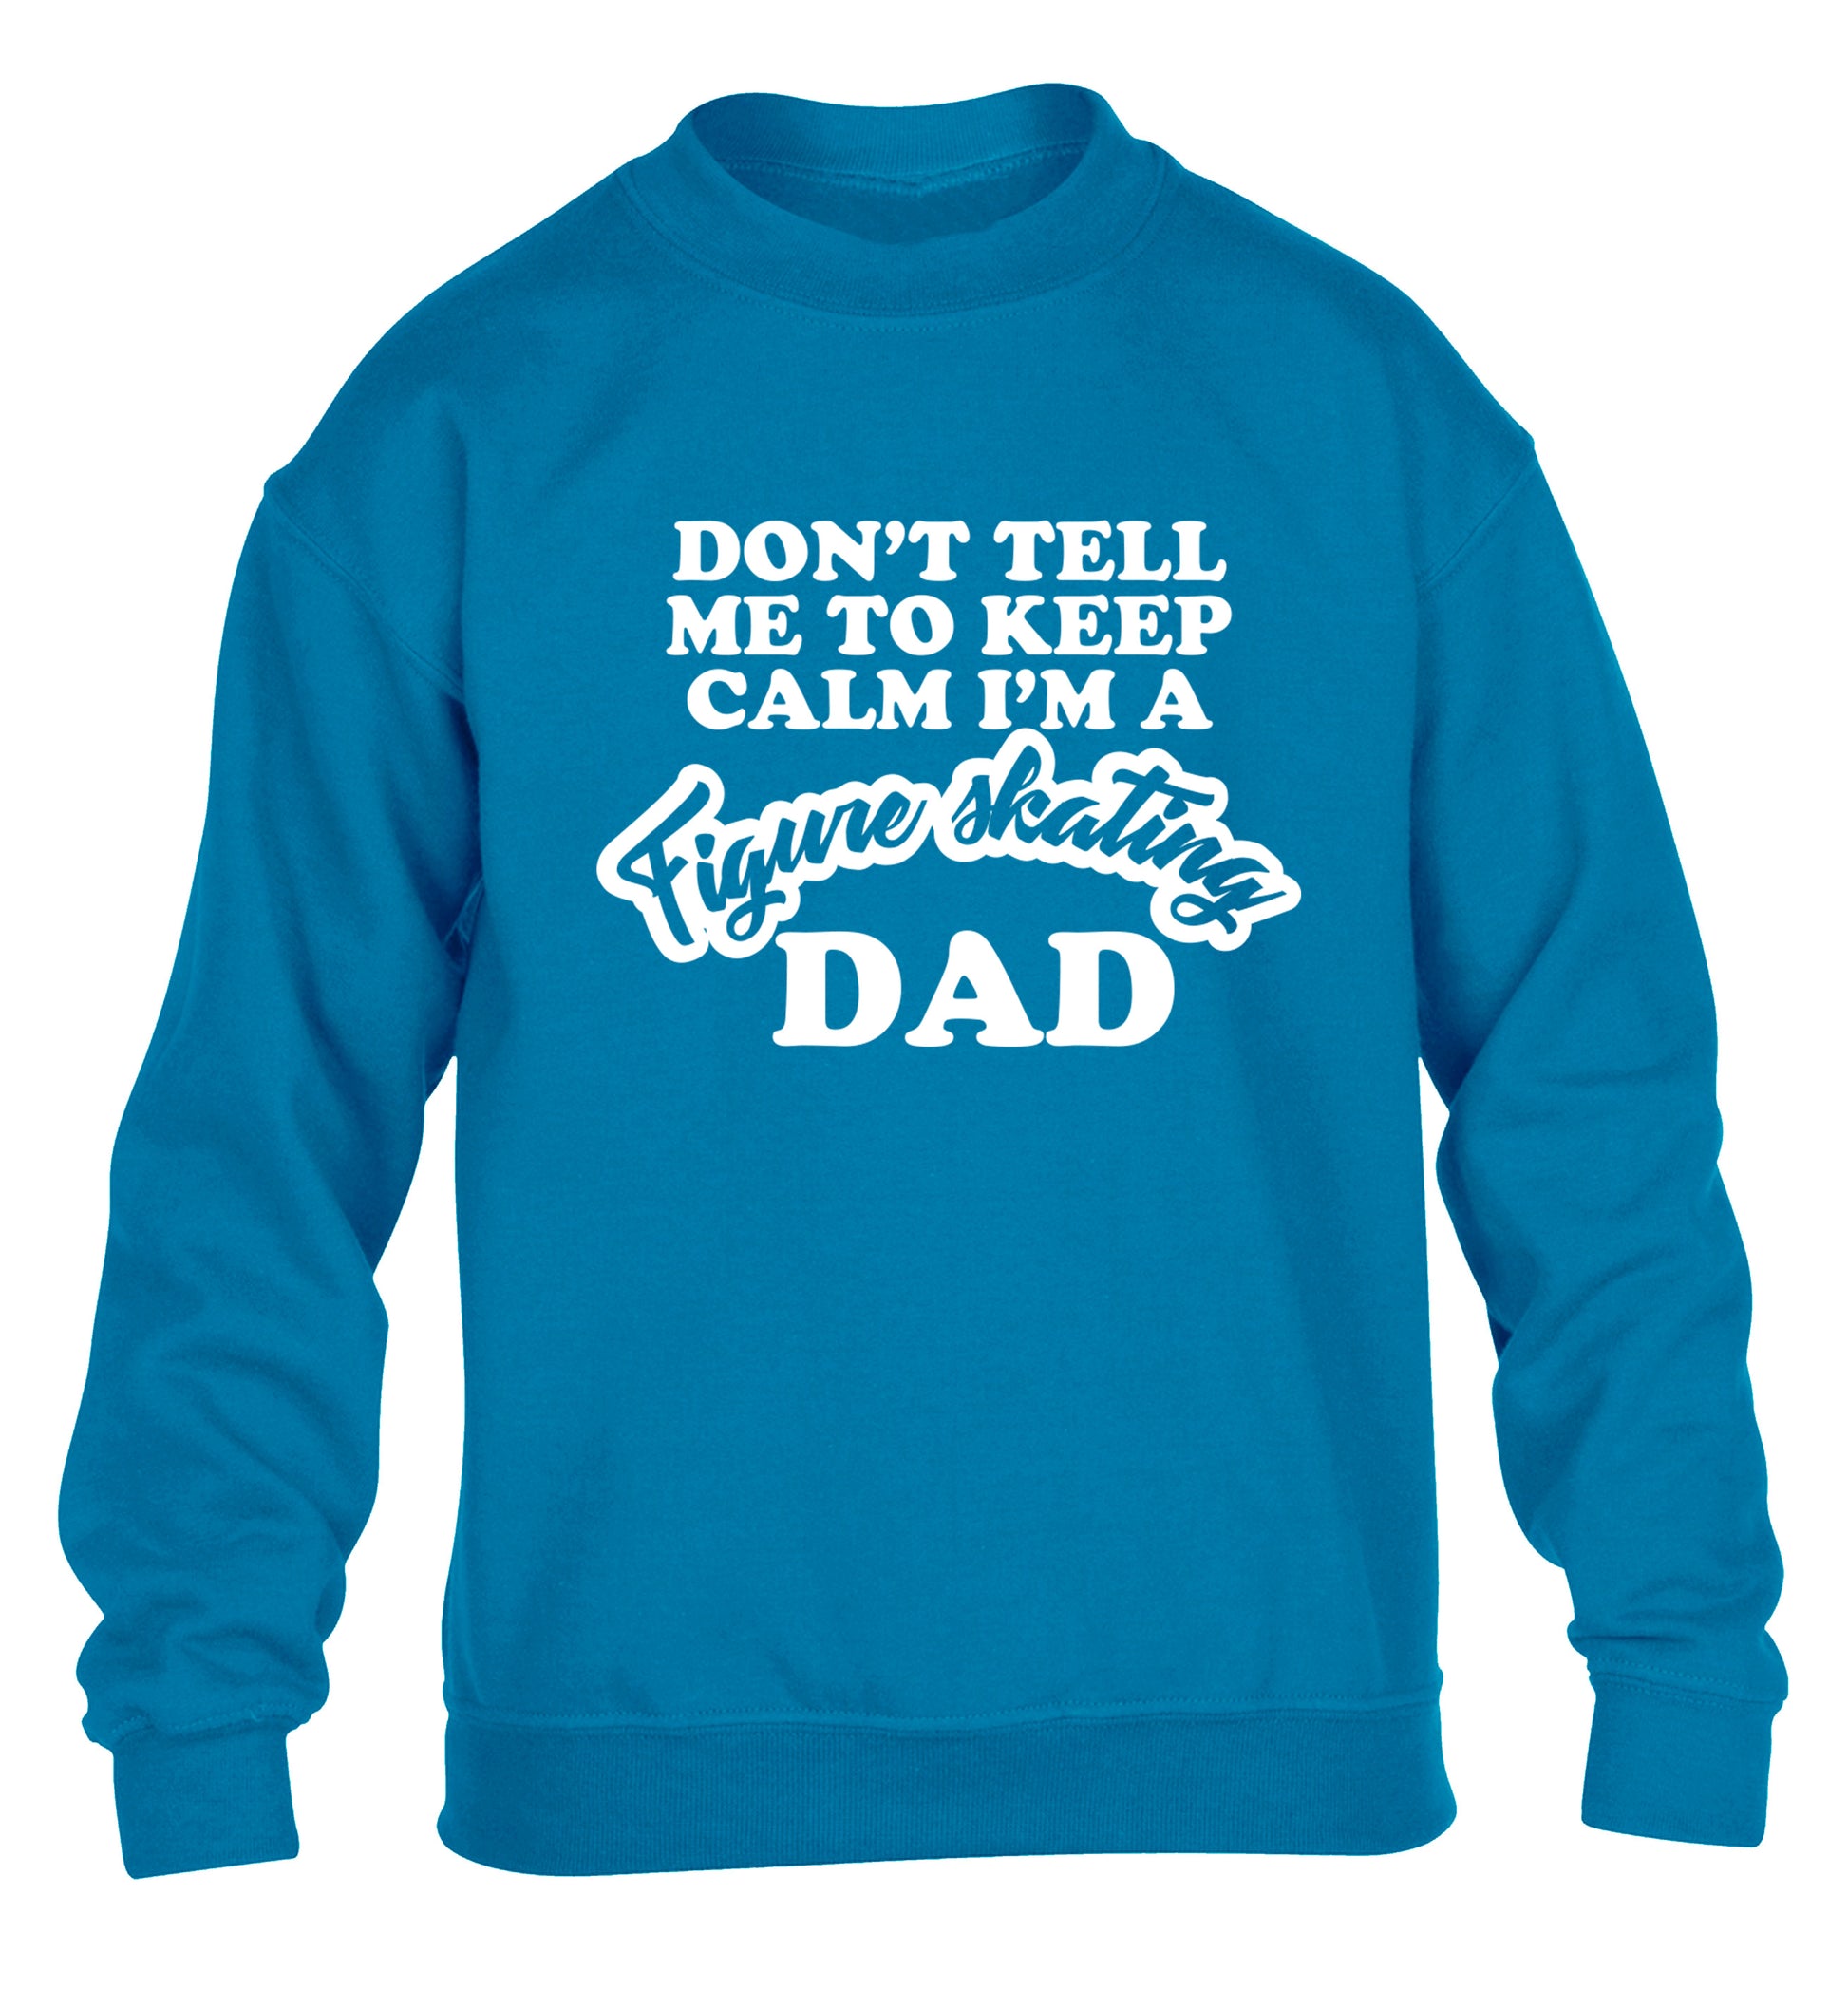 Don't tell me to keep calm I'm a figure skating dad children's blue sweater 12-14 Years